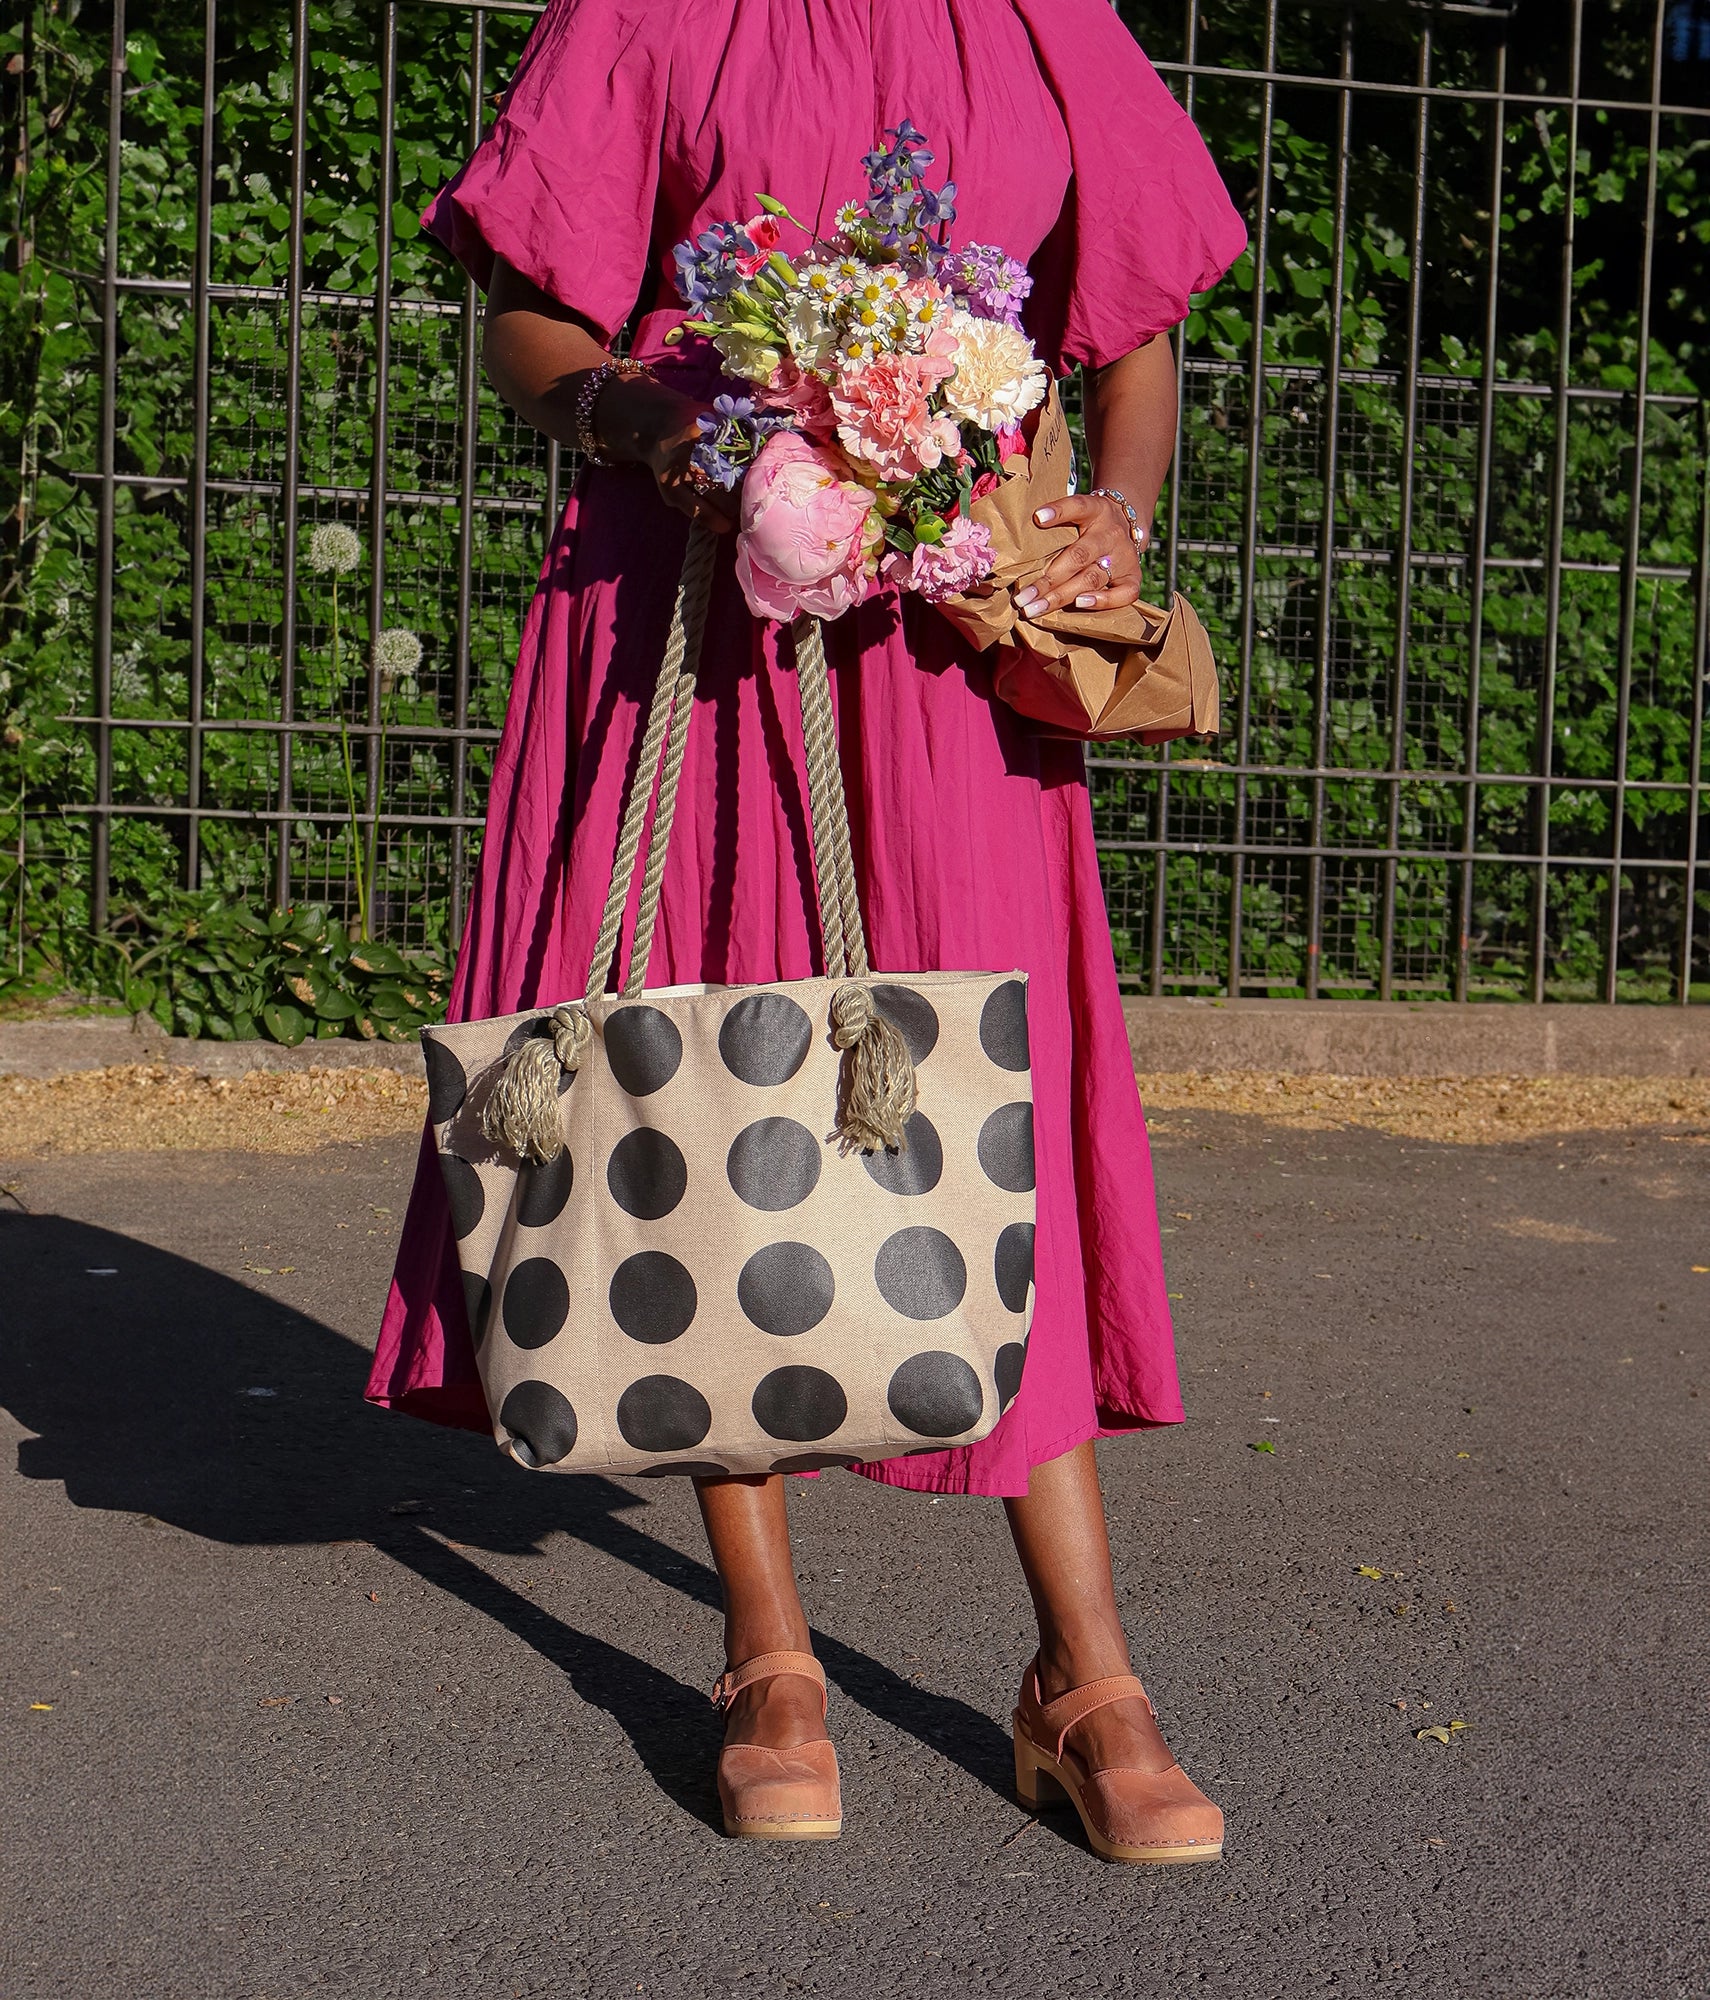 woman wearing a pink dress and a pair of high heeled closed-toe clog sandal in blush pink nubuck leather stapled on a light wooden base